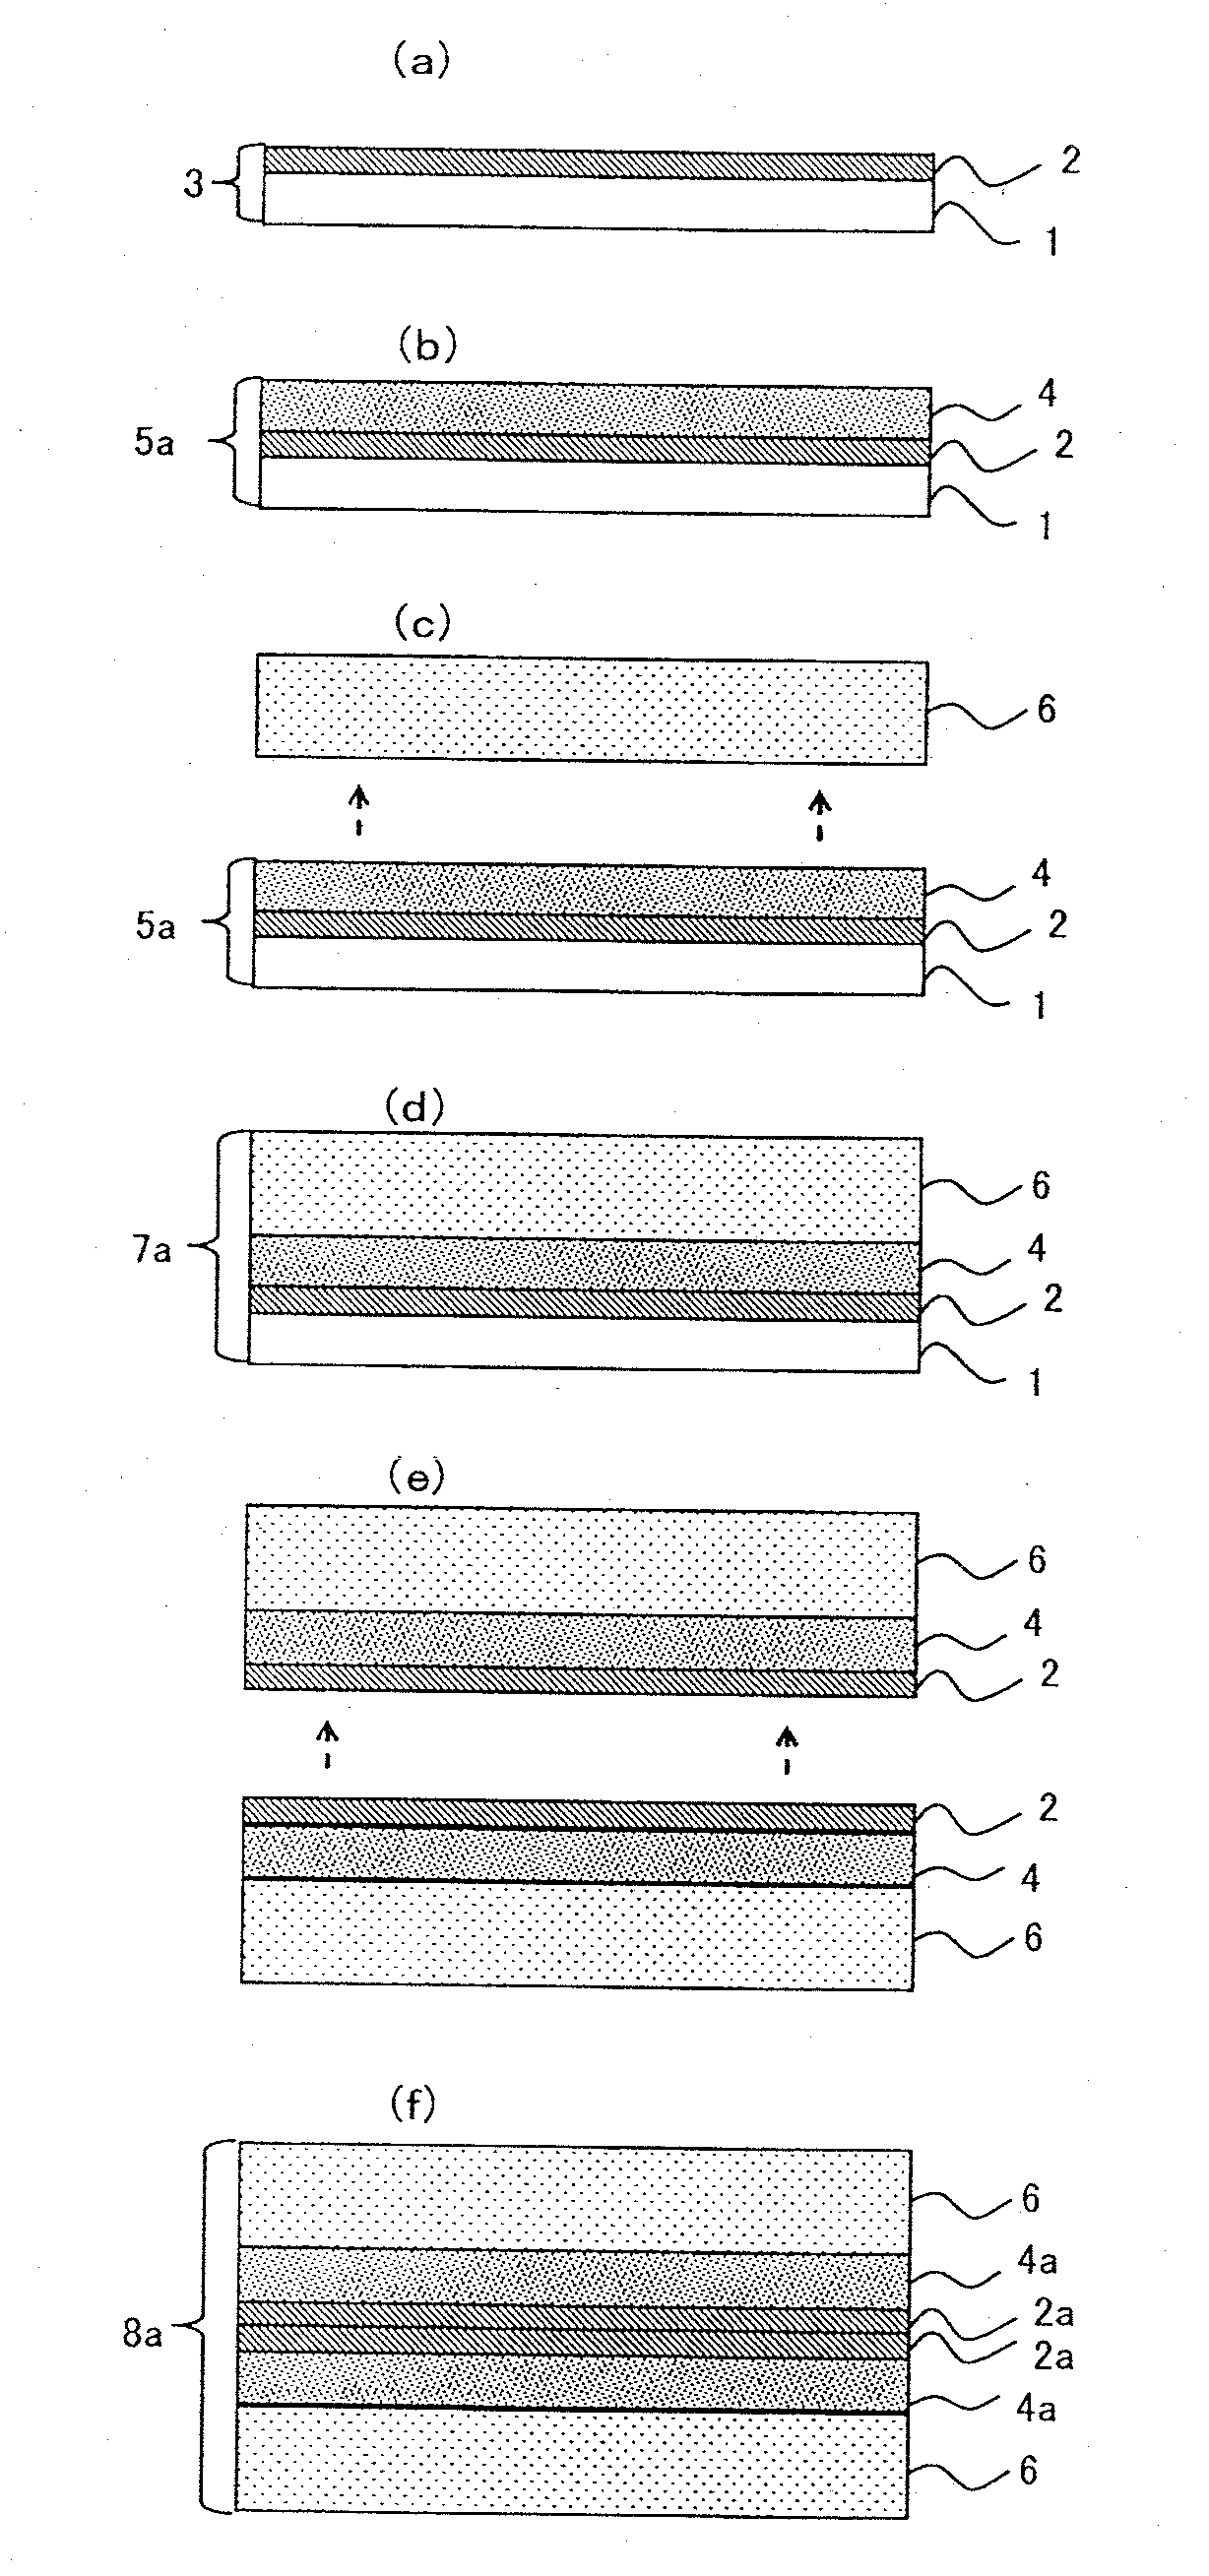 Laminate body, laminate plate, multilayer laminate plate, printed wiring board, and method for manufacture of laminate plate